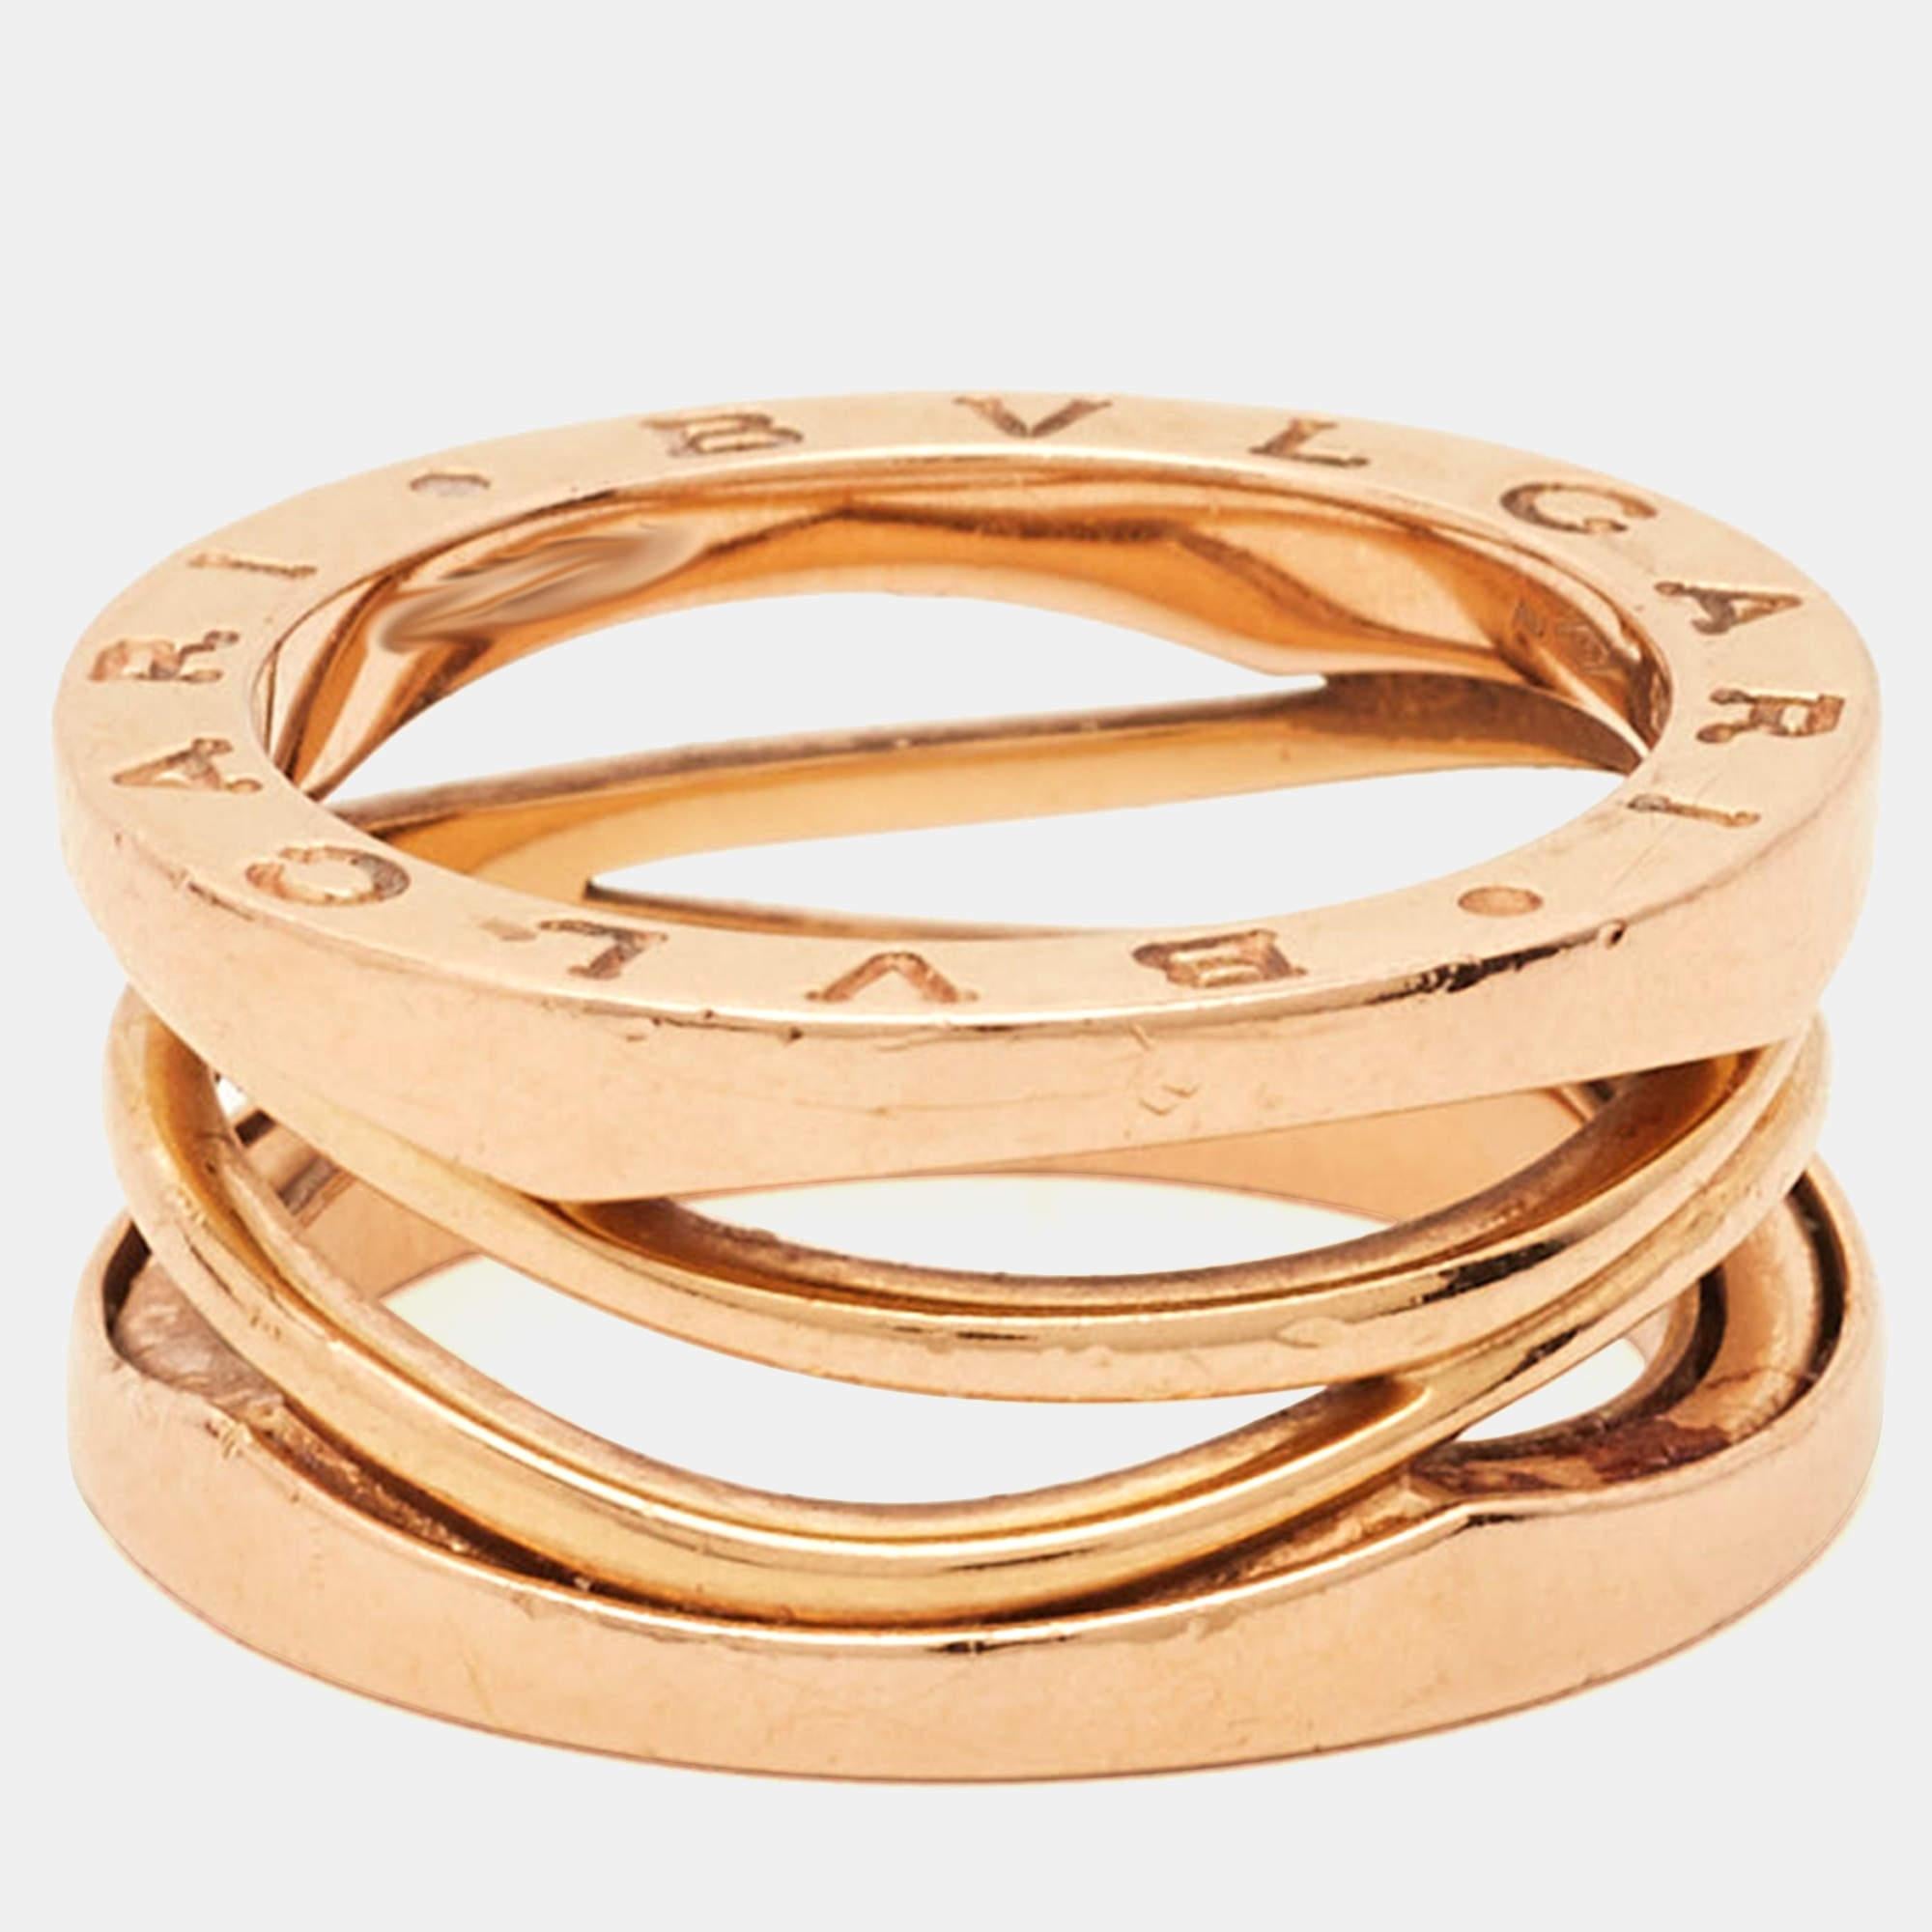 The Bvlgari B.Zero1 Design Legend ring is an exquisite piece of jewelry. Crafted in stunning 18K rose gold, this ring features three interlocking bands, symbolizing eternity and unity. Its iconic design showcases the brand's legendary craftsmanship